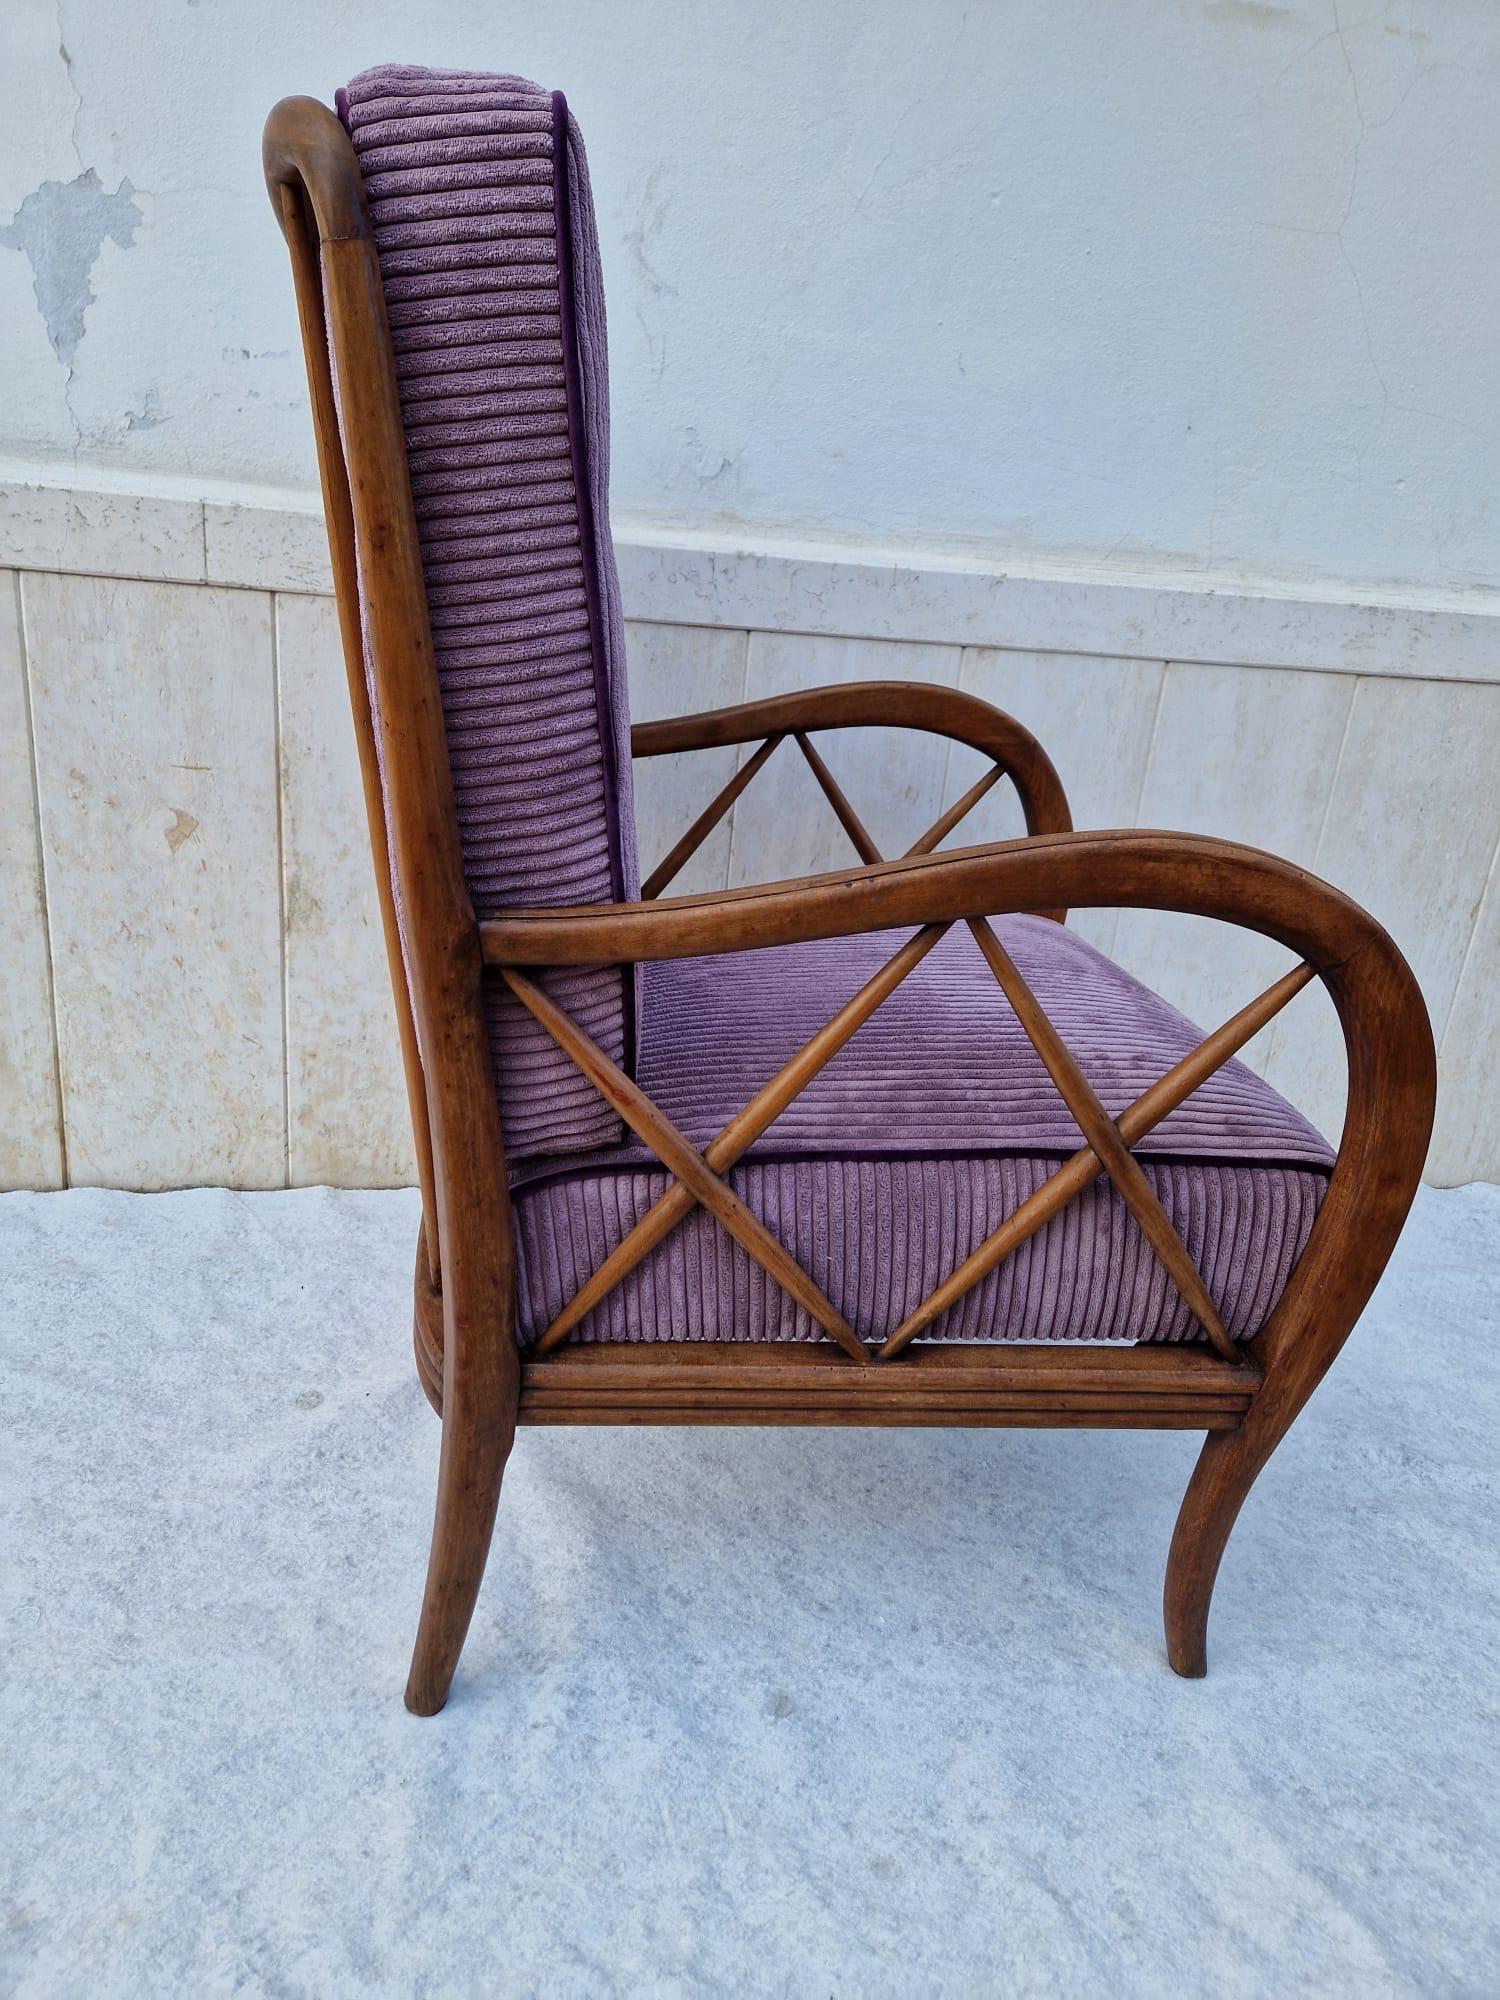 Velvet armchair by Paolo Buffa, Made in Italy, 1950s.  
Rare model of most iconic and important dimension of mid-century Italian design. The frame of this armchair is made of wood, the cushions upholstered in lilac-colored corduroy with